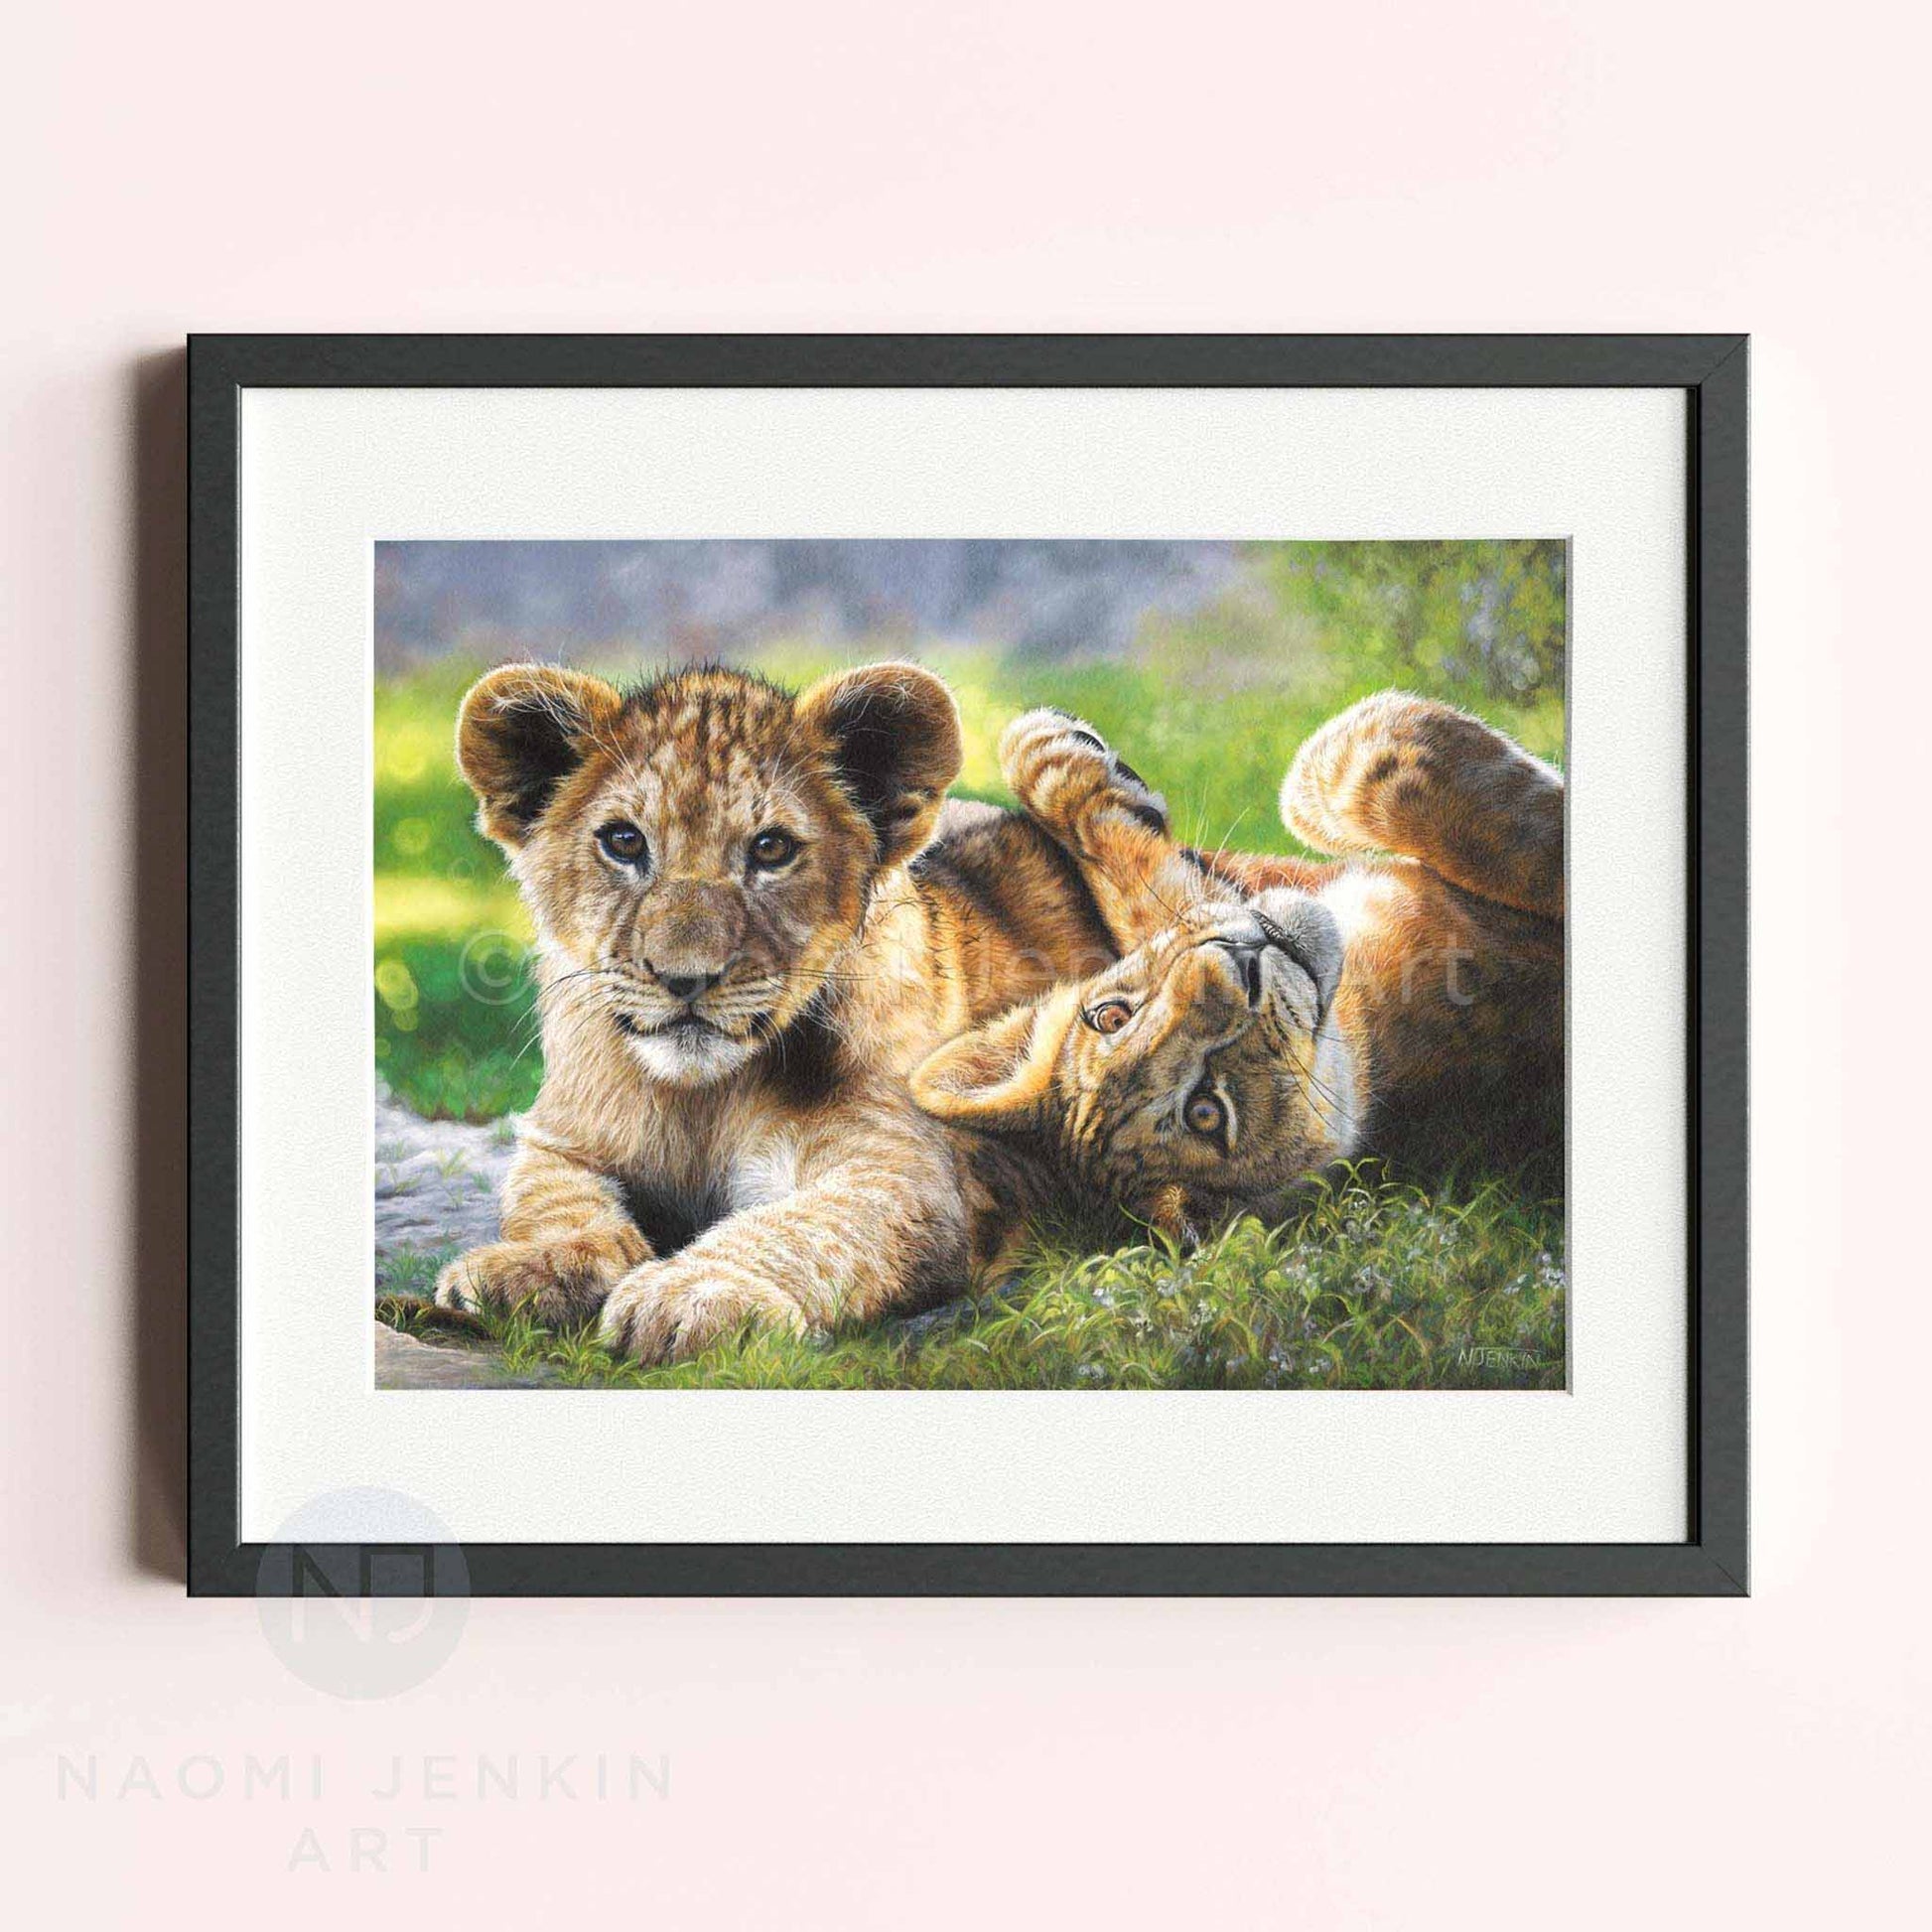 Framed art print of two lion cubs by wildlife artist Naomi Jenkin